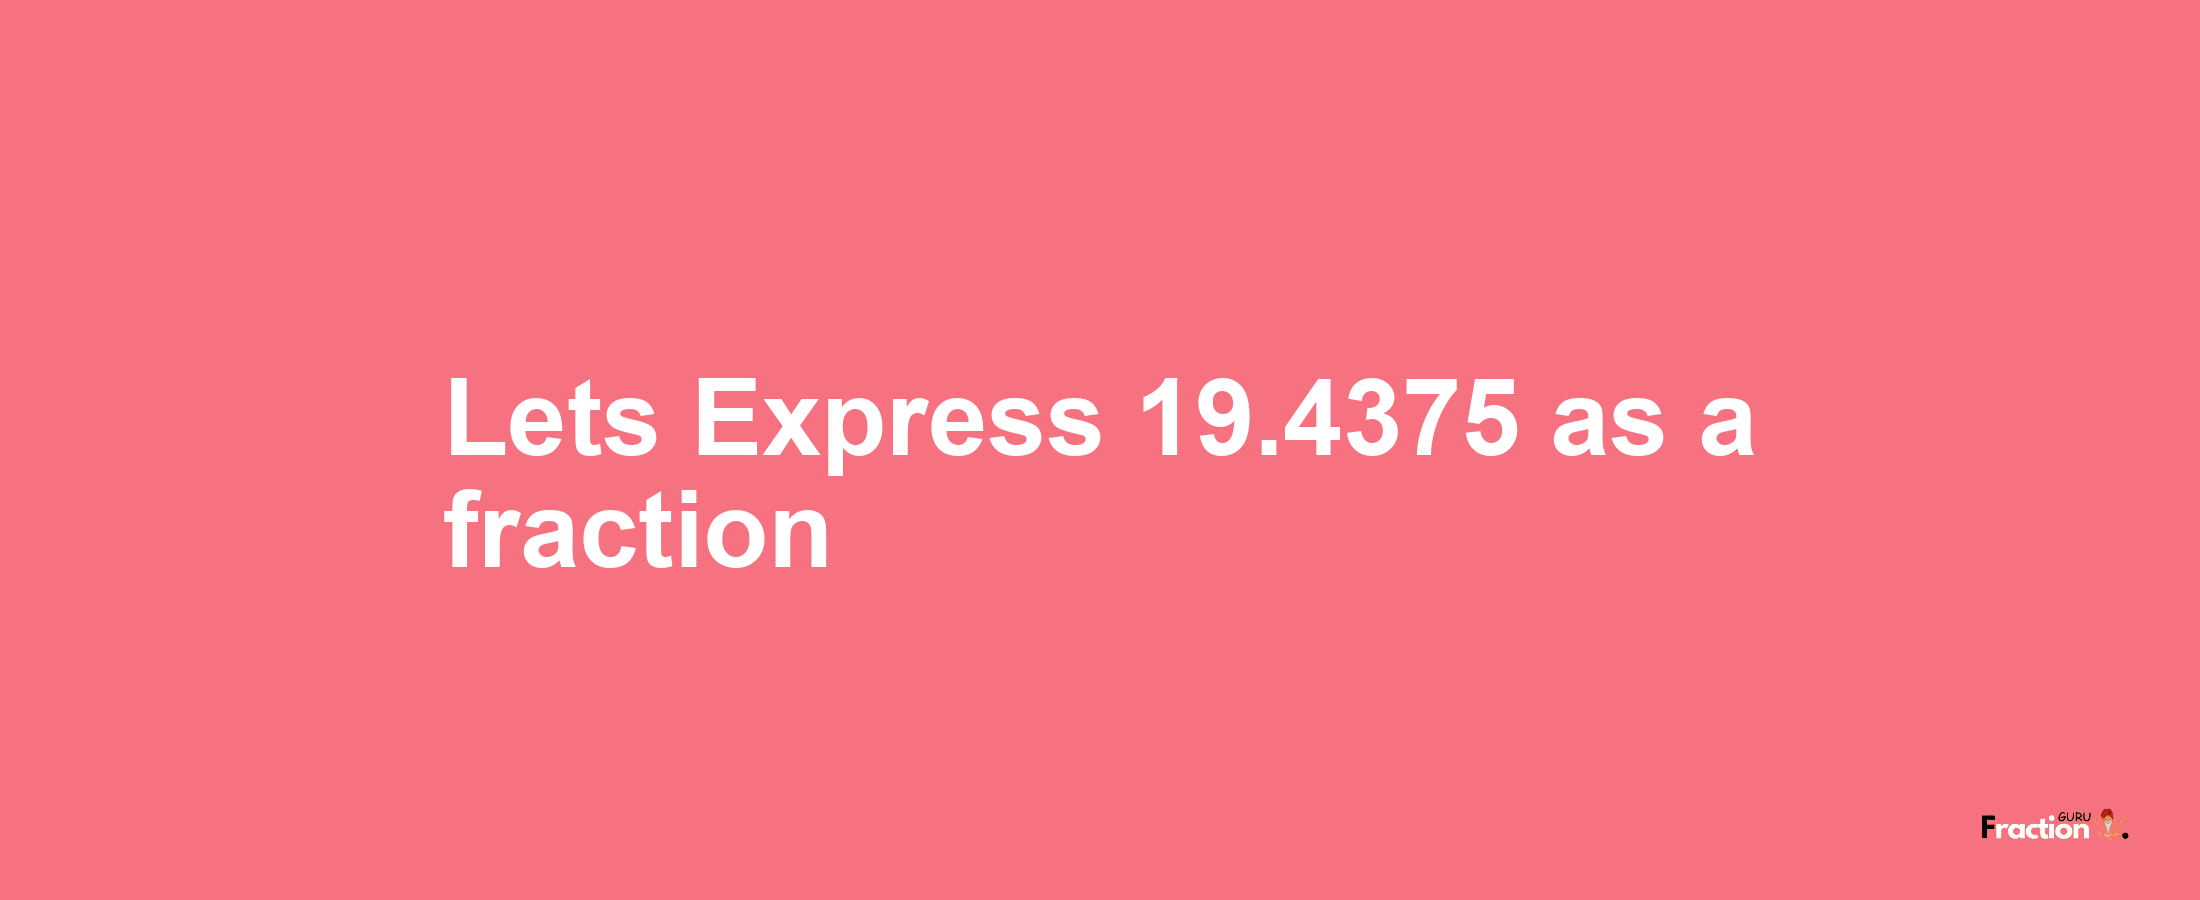 Lets Express 19.4375 as afraction